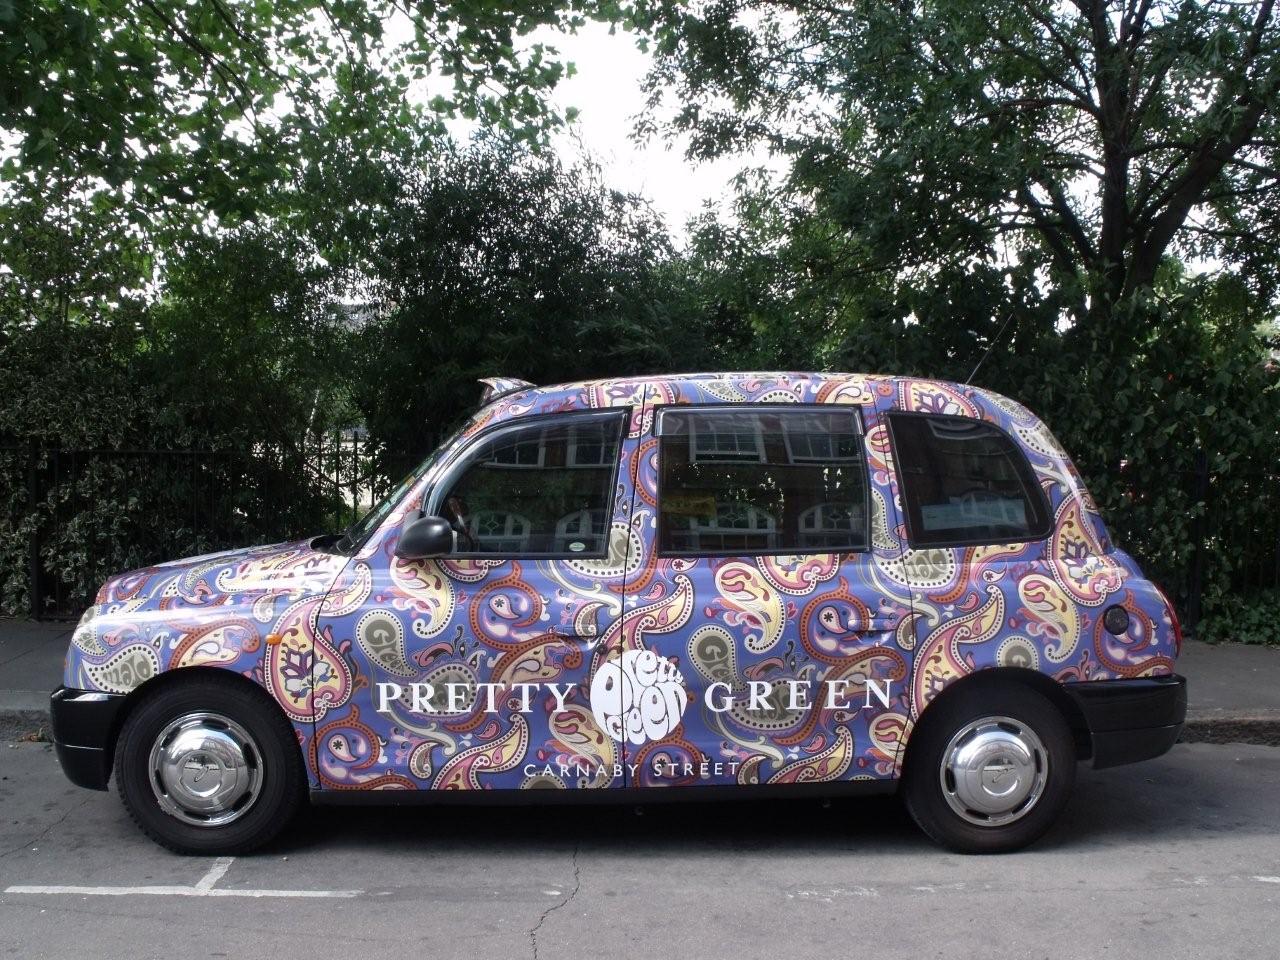 2010 Ubiquitous taxi advertising campaign for Pretty Green  - Pretty Green